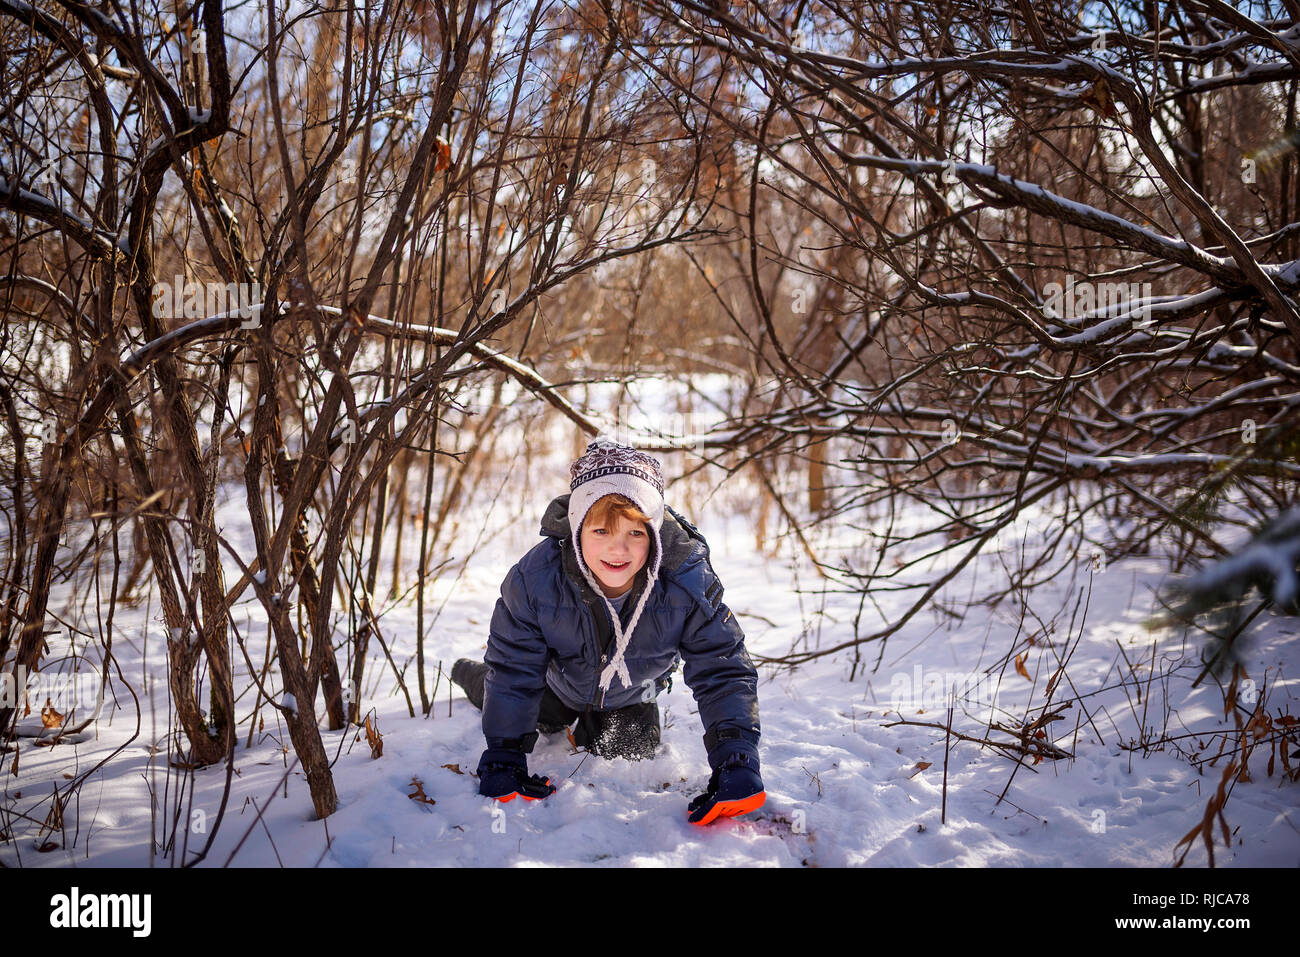 Boy crawling through the snow, Wisconsin, United States Stock Photo